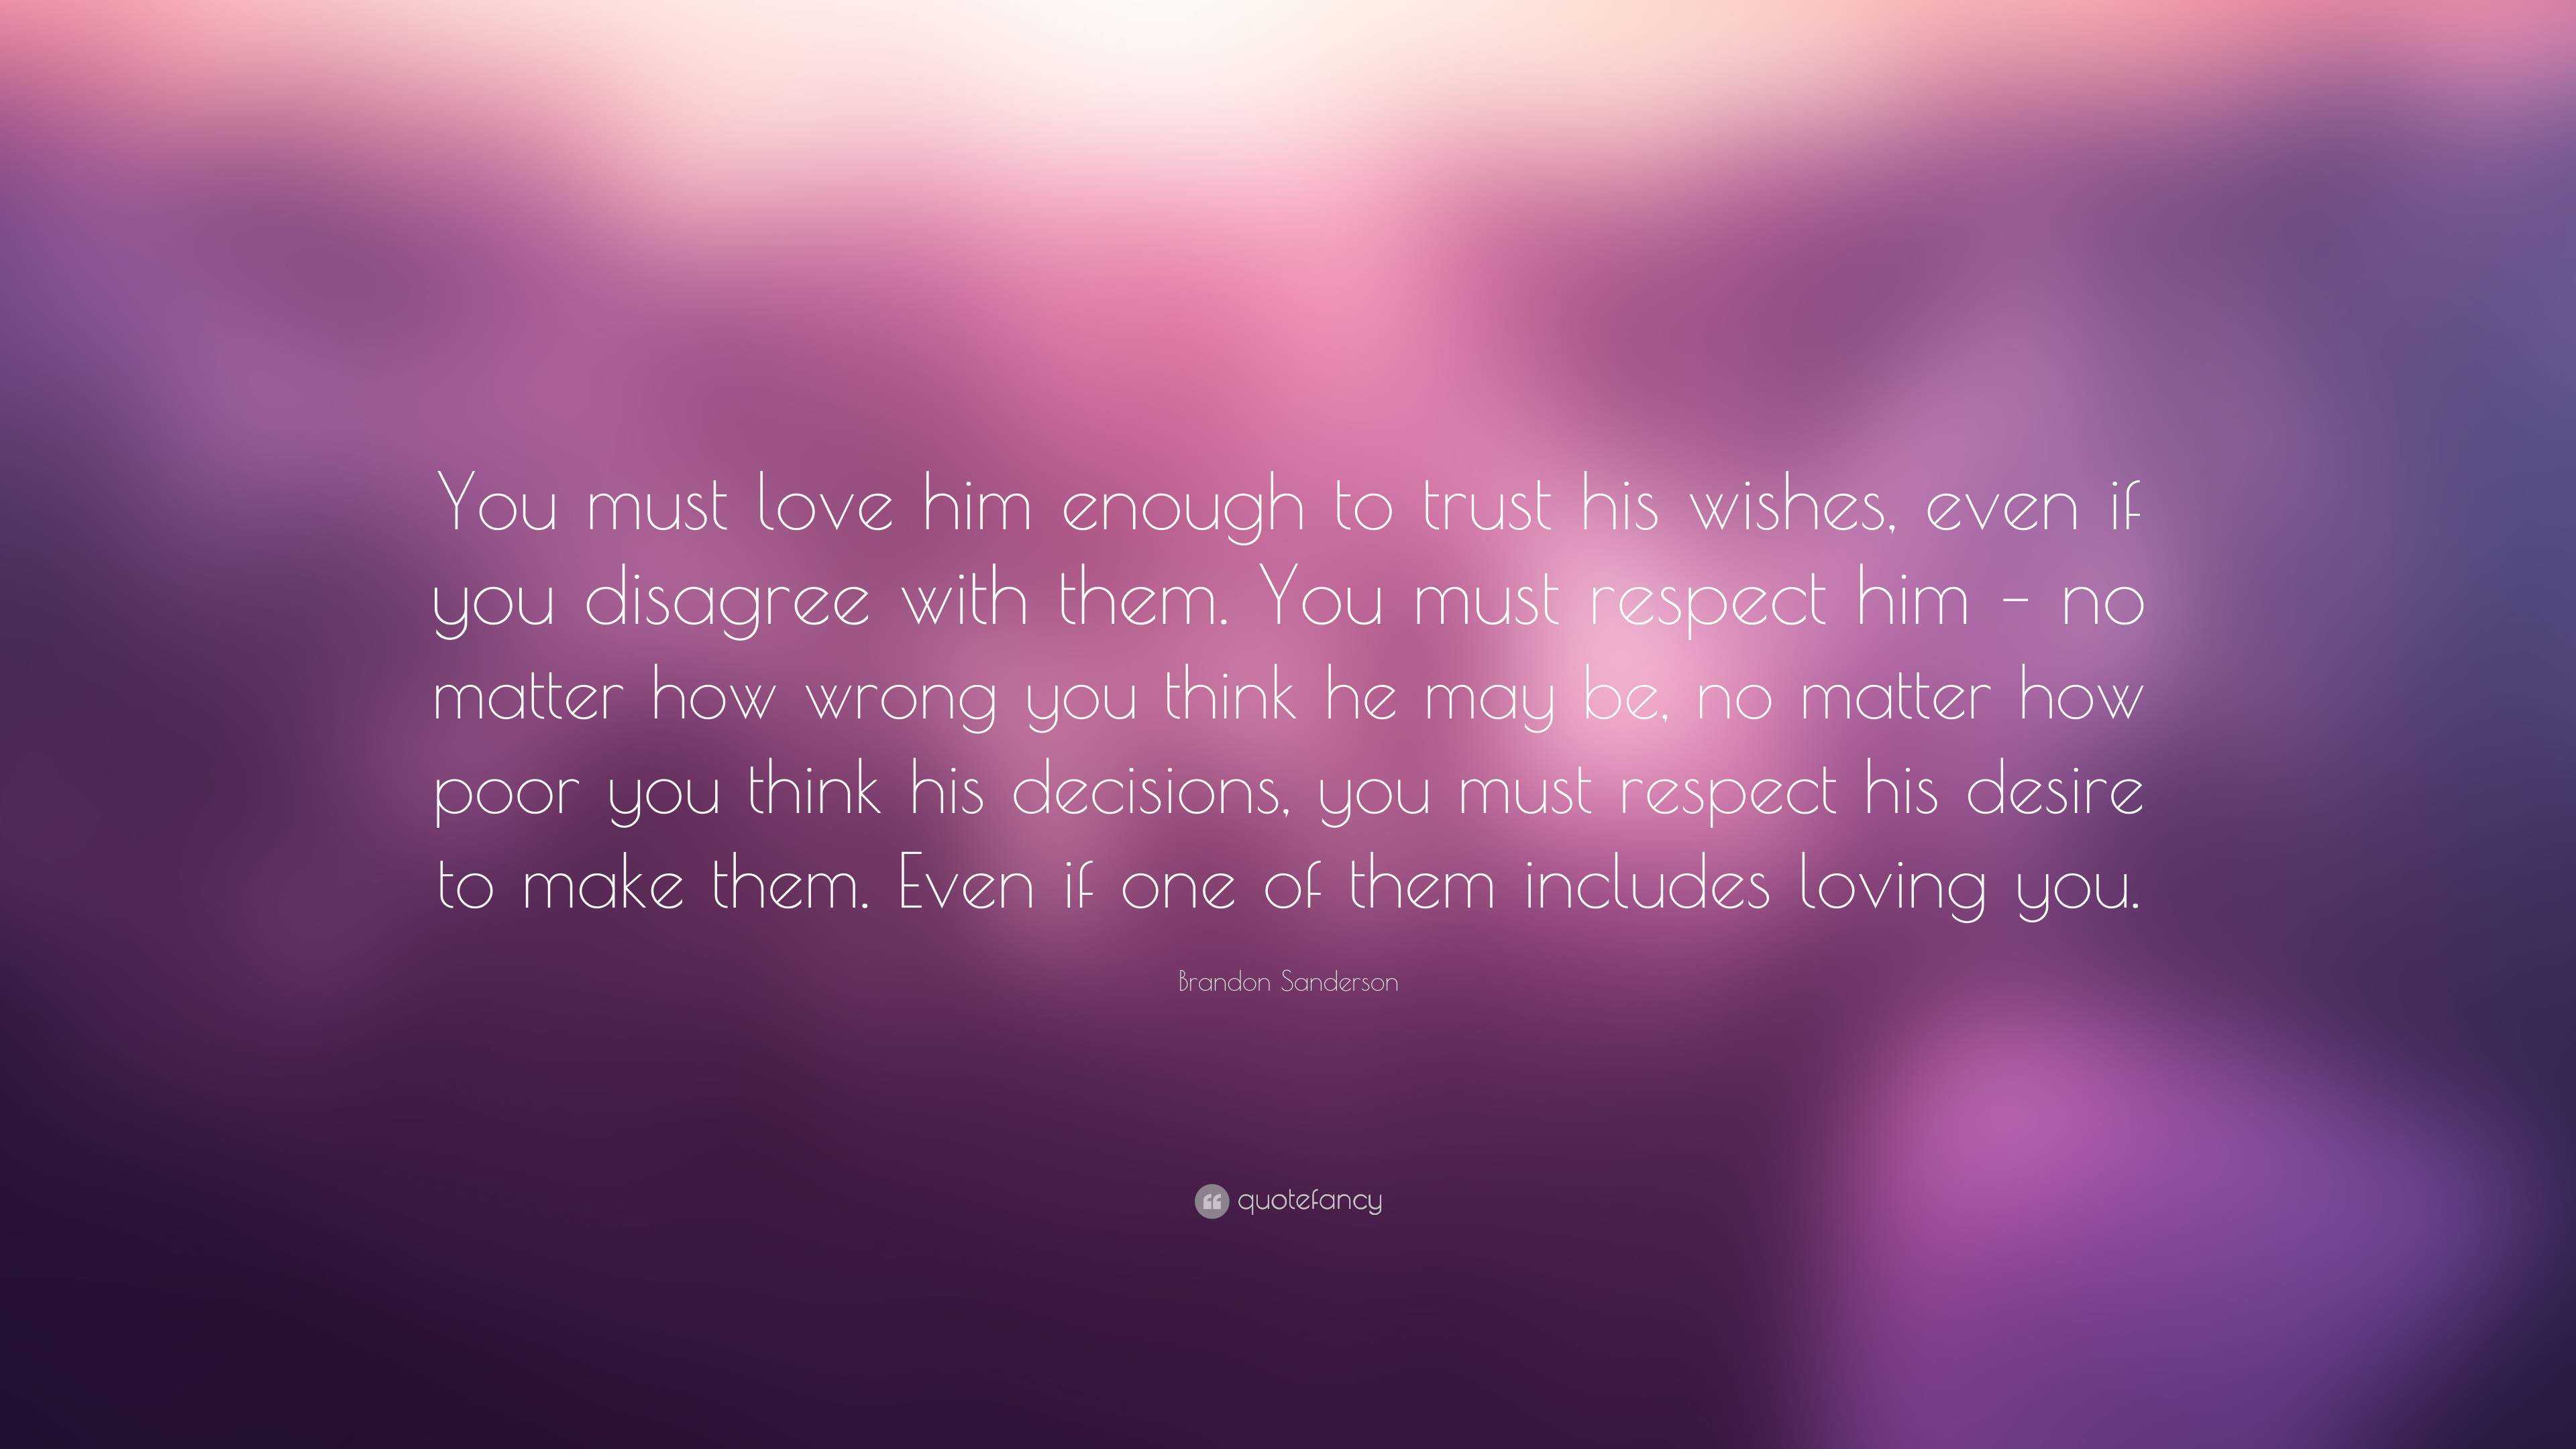 Brandon Sanderson Quote: “You must love him enough to trust his wishes ...